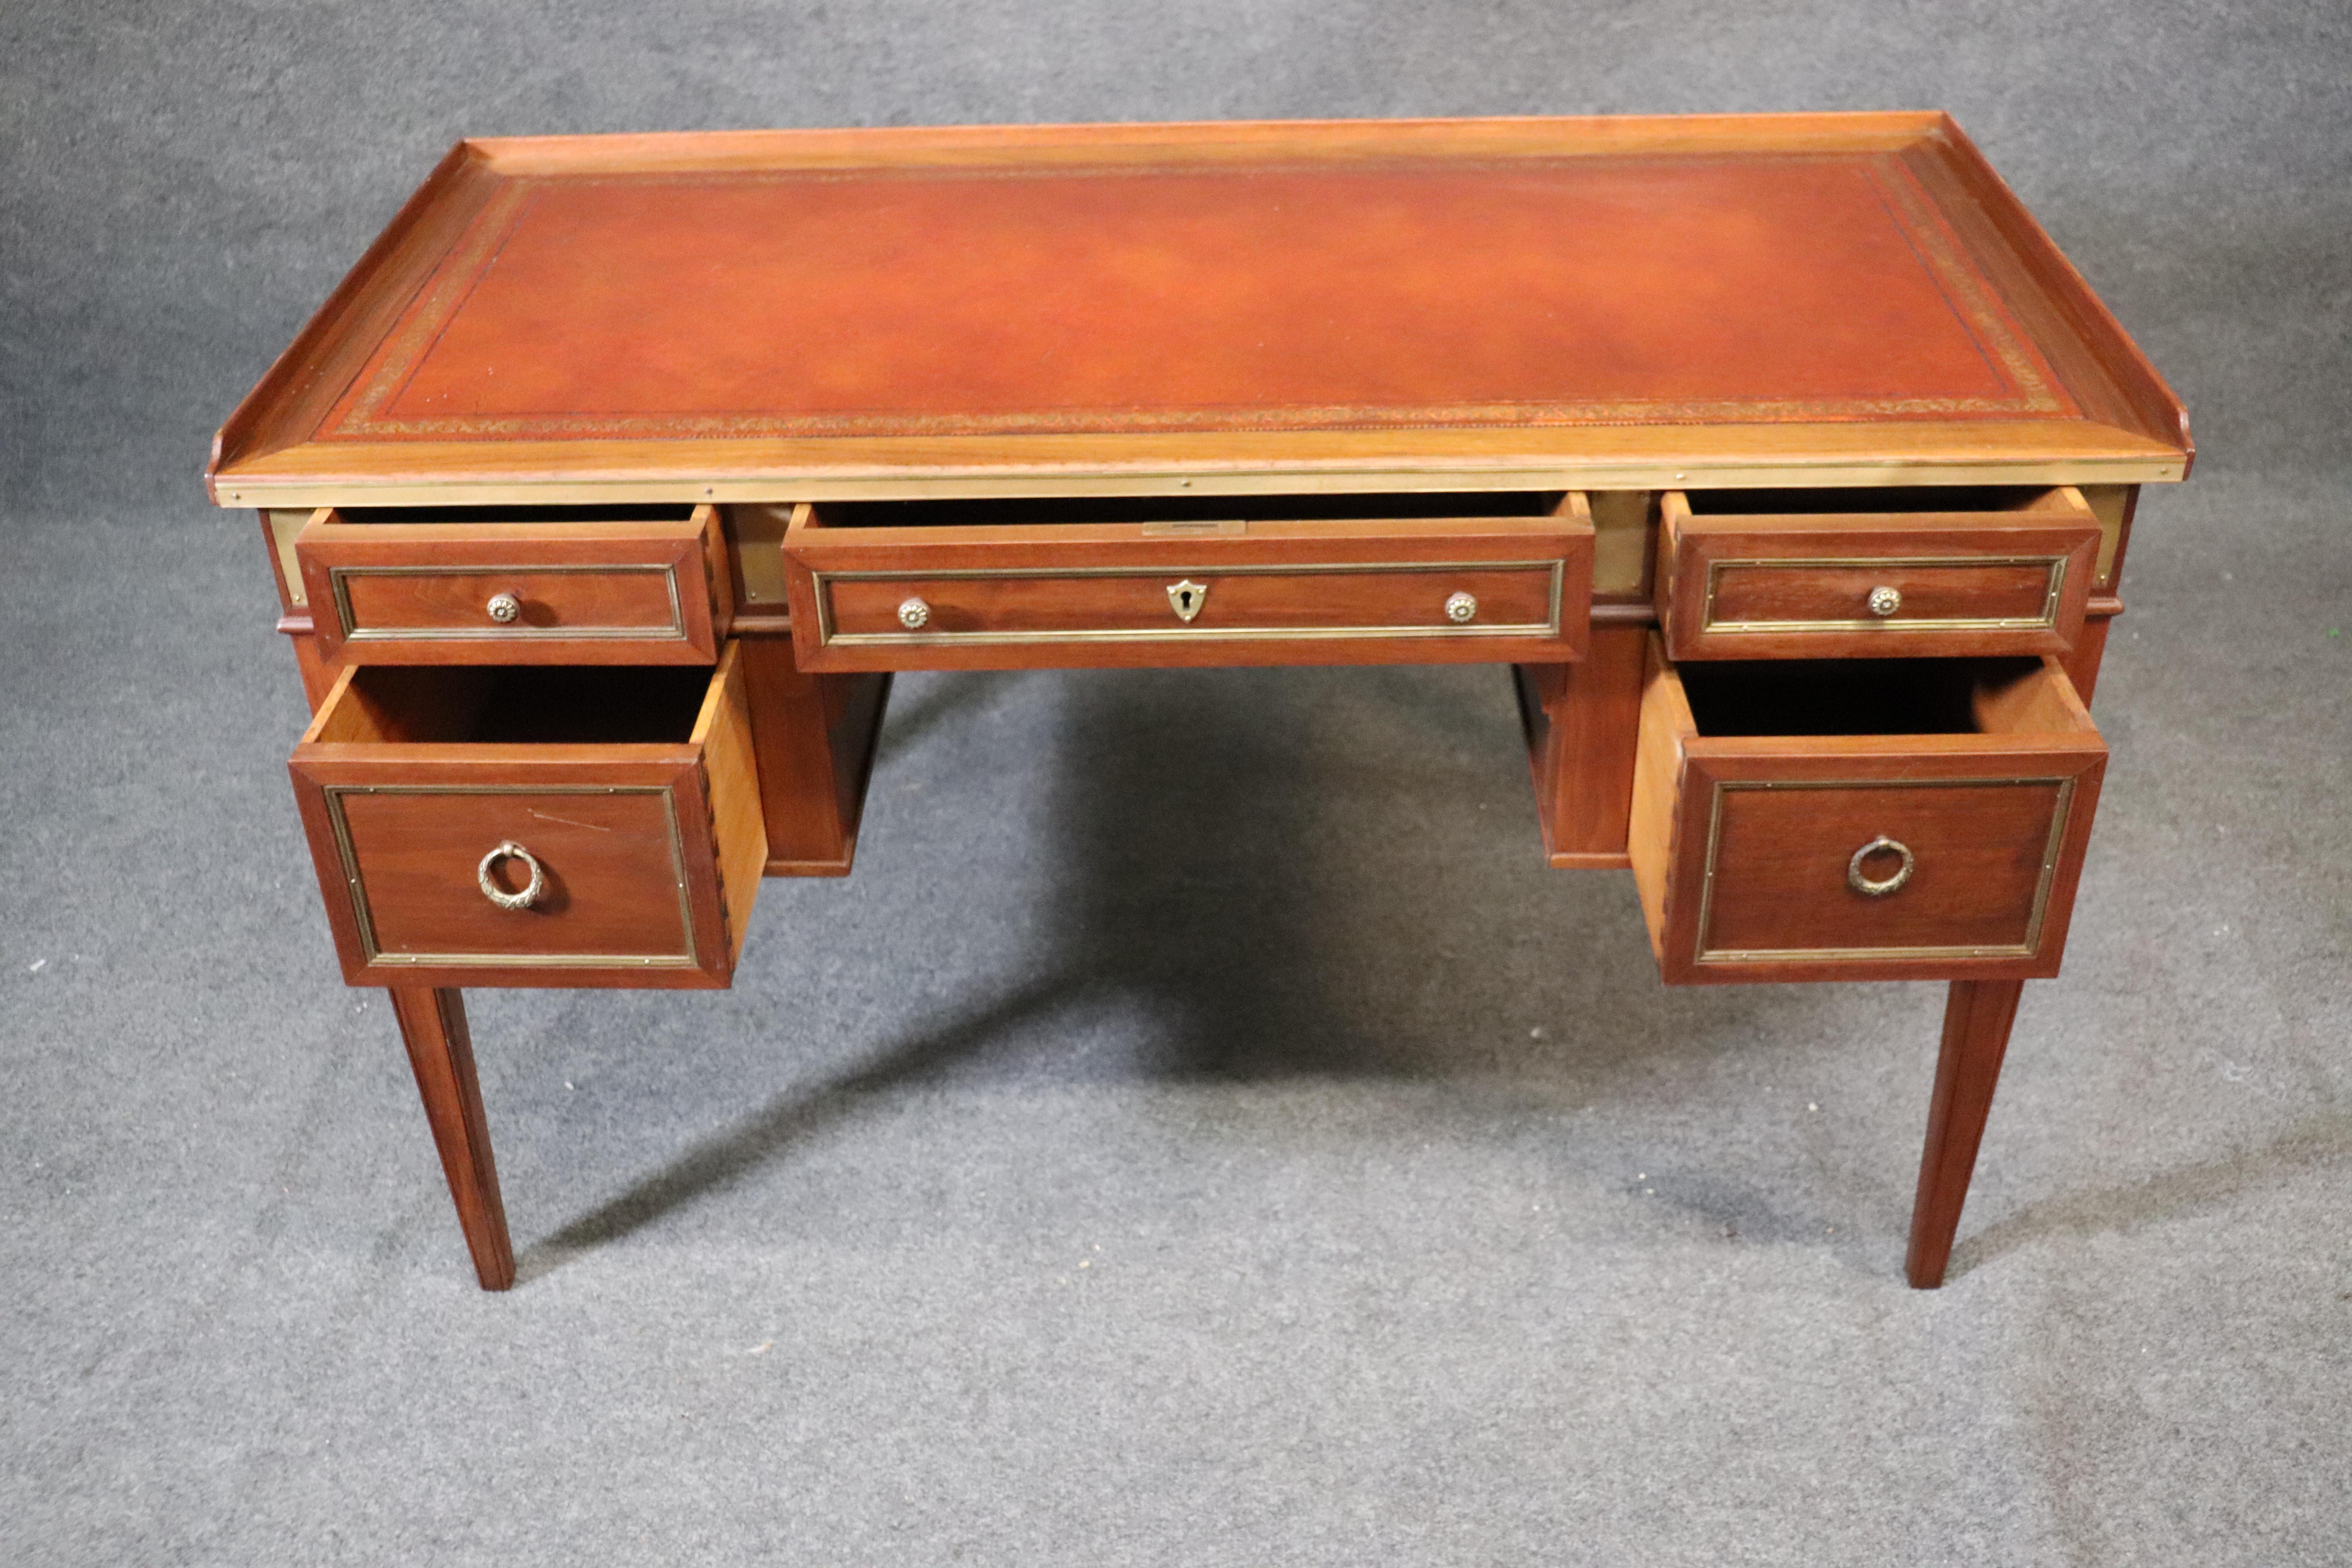 This is a gorgeous smaller writing desk in the Directoire taste, circa 1940. The desk is made of mahogany with brass mounts and a nice leather top and measures 49 wide x 24 deep x 30 tall.